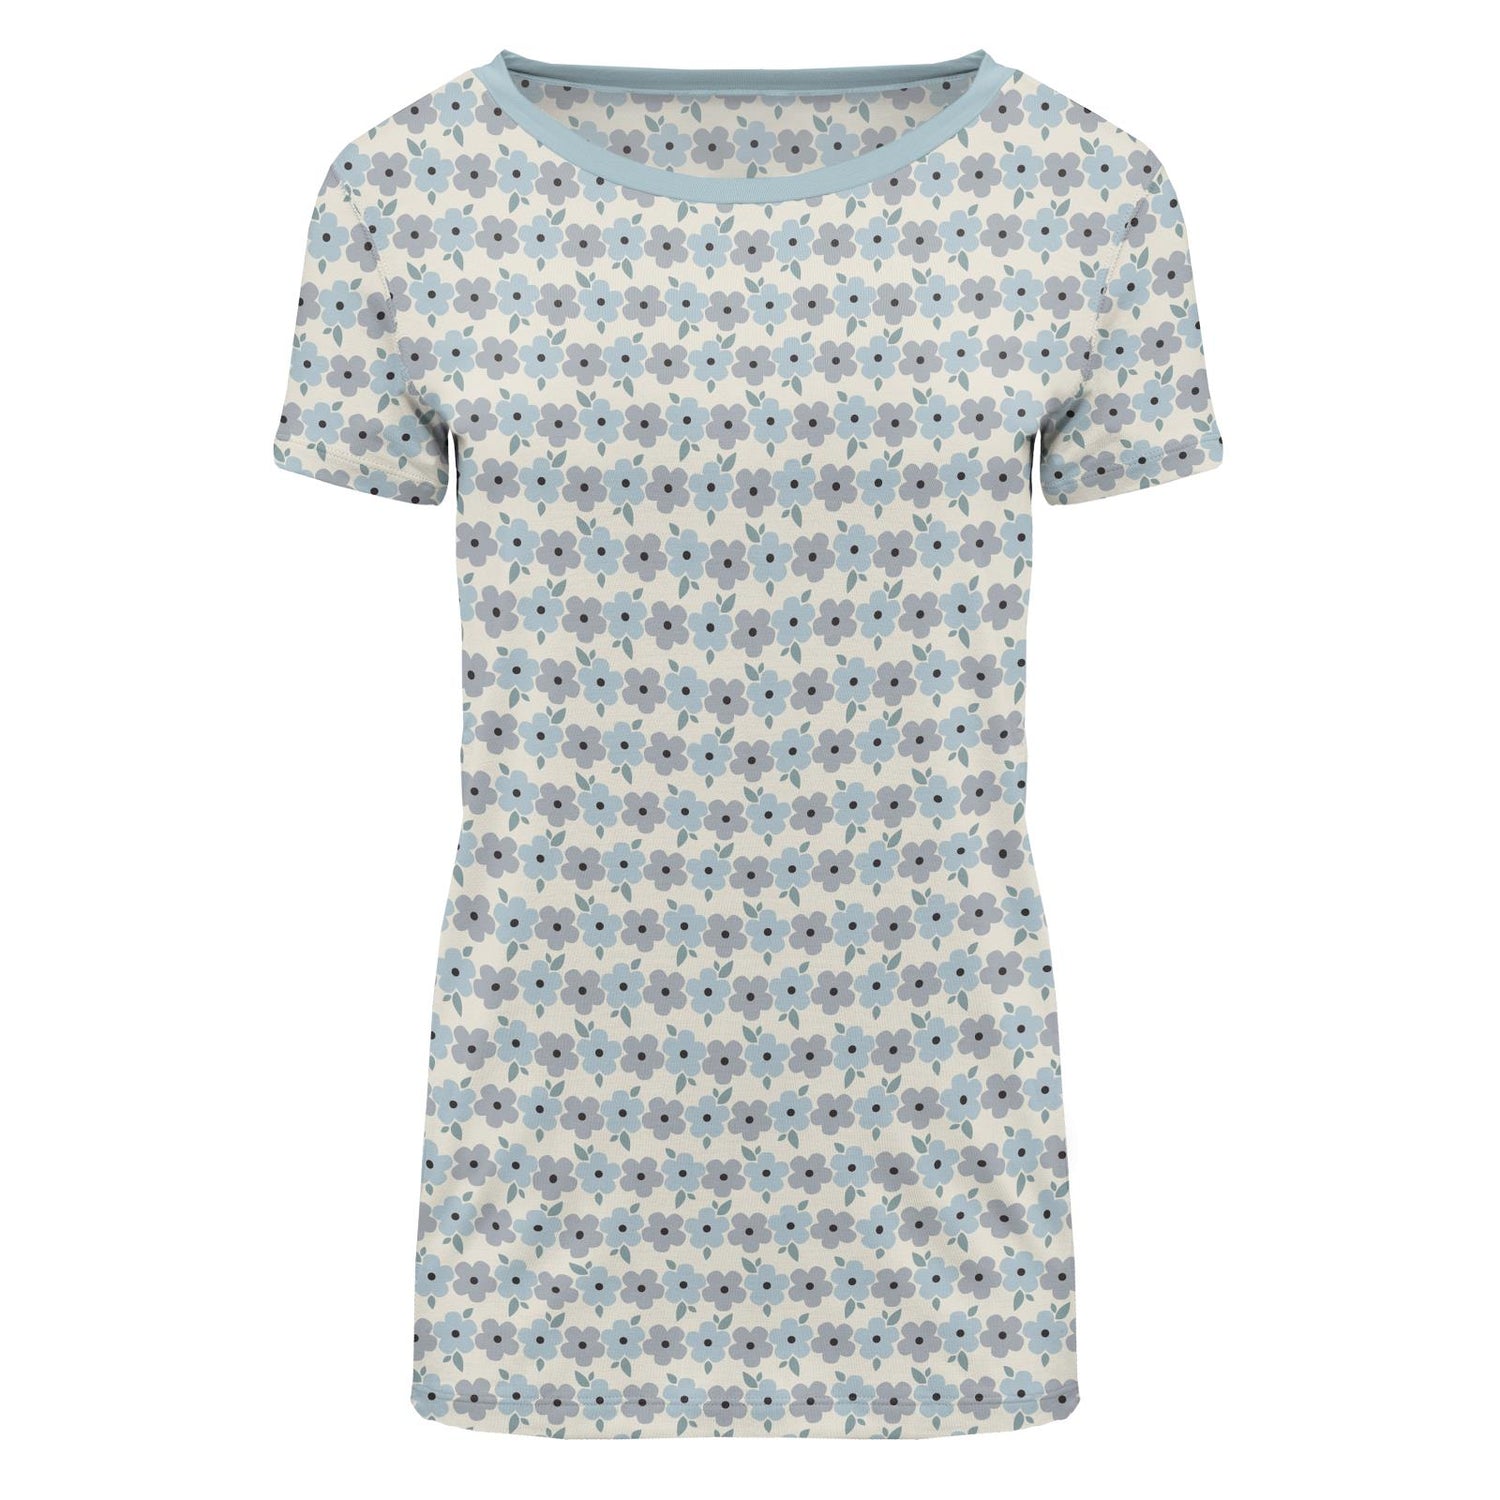 Women's Print Short Sleeve Relaxed Tee in Natural Hydrangea